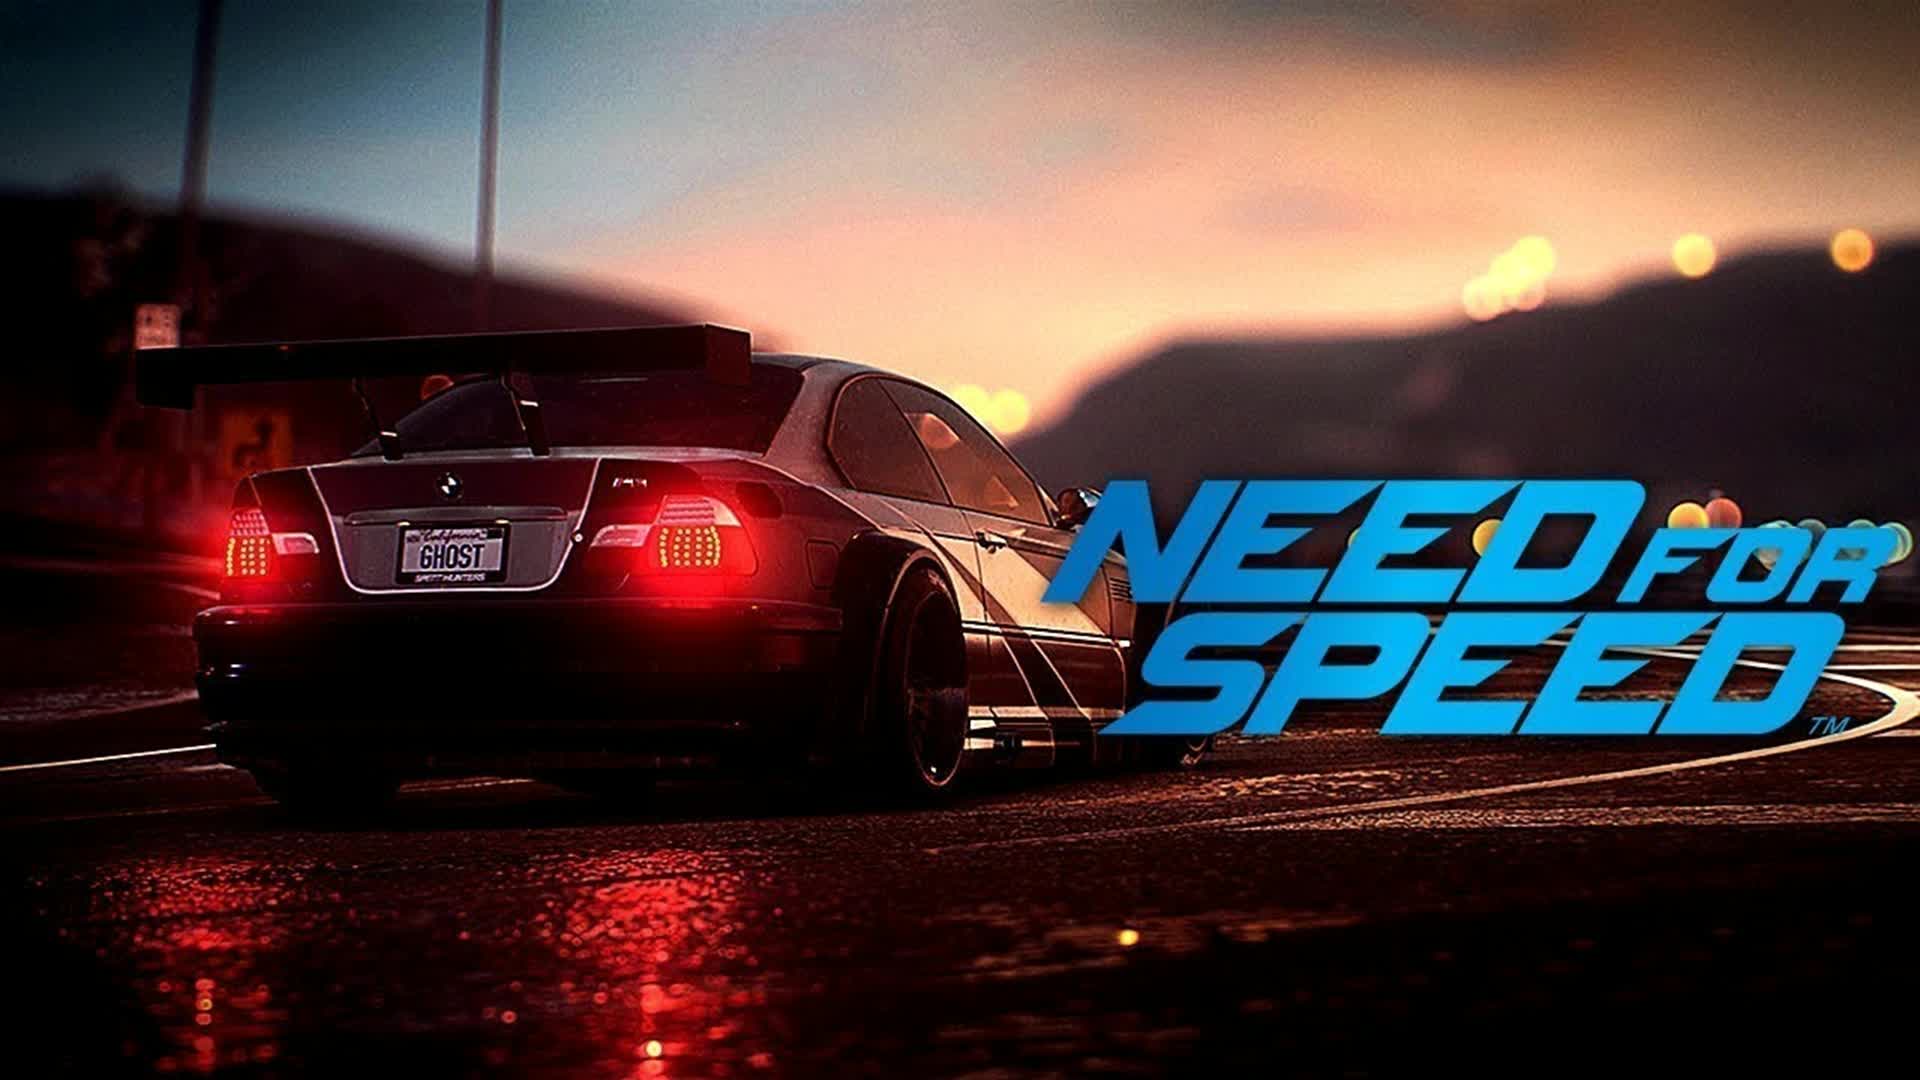 Неед спид. Need for Speed (игра, 2015). NFS need for Speed 2015. NFS 2015 Постер. Need for Speed most wanted Payback.